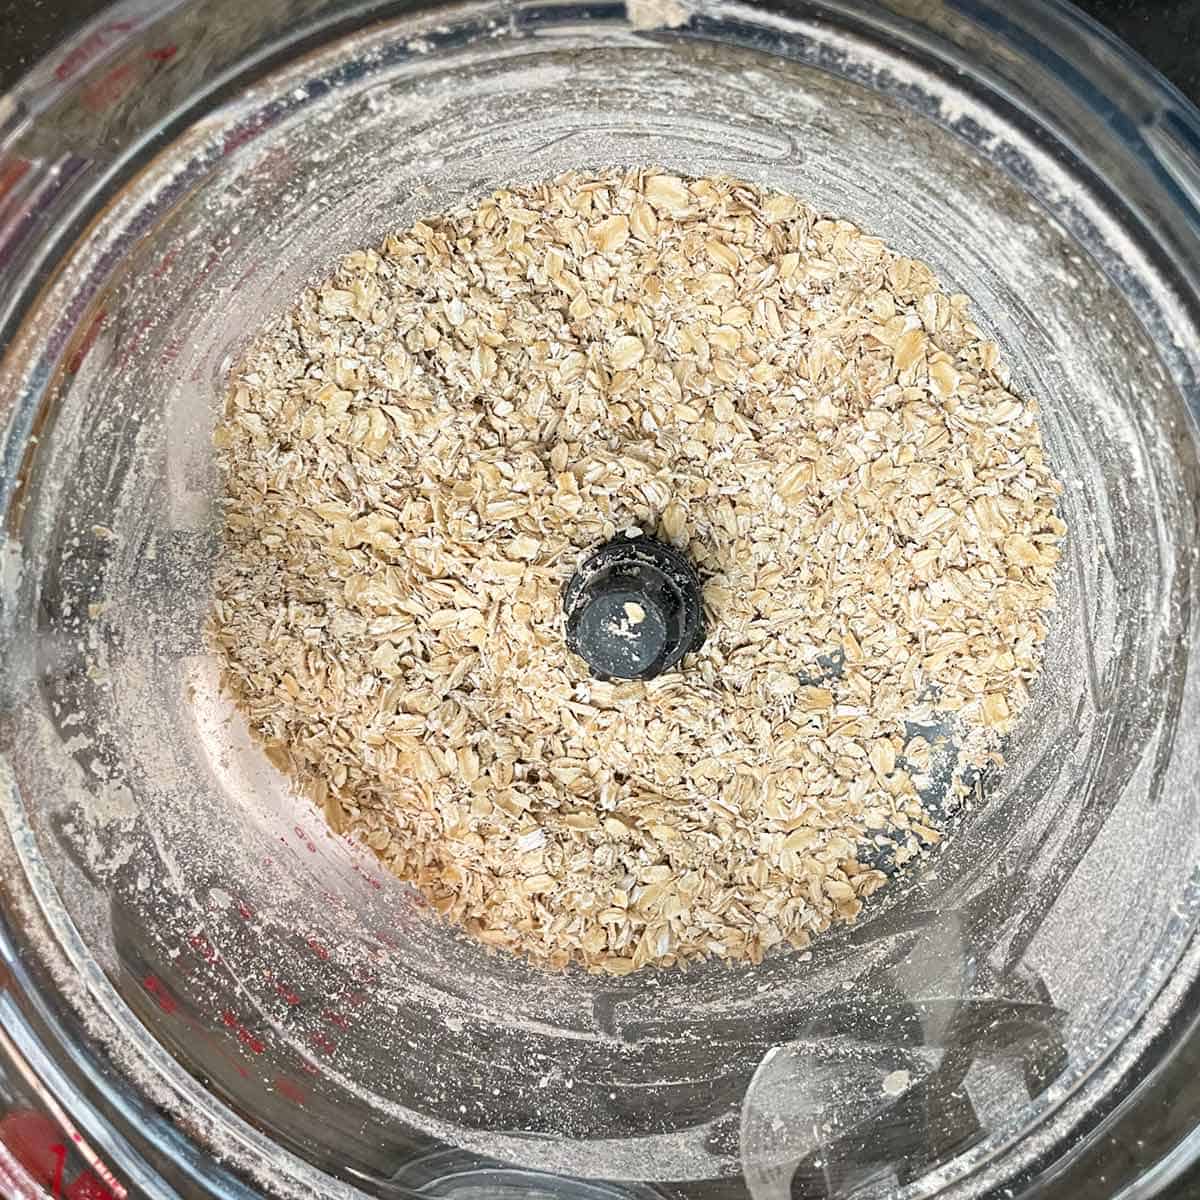 Old fashioned oats after pulsing in a food processer 10 times.